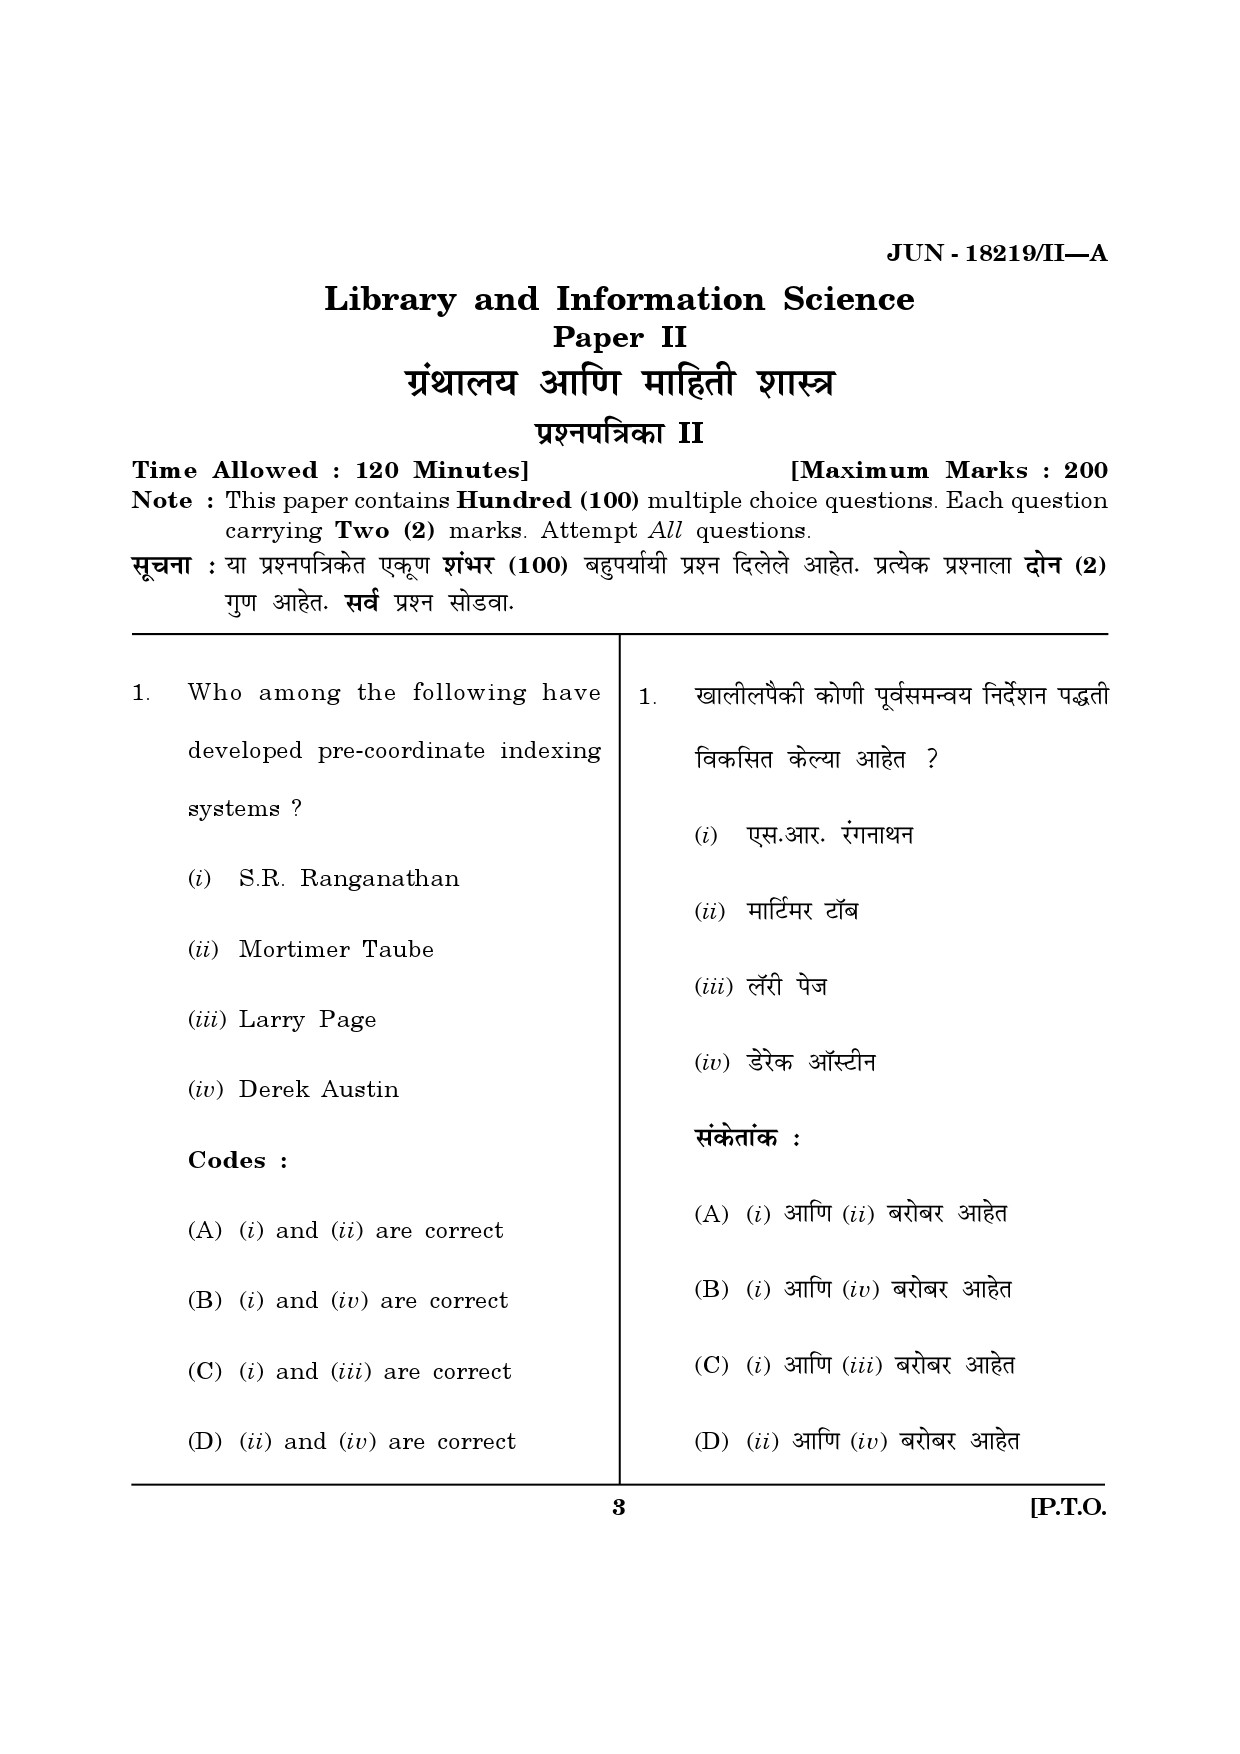 Maharashtra SET Library Information Science Question Paper II June 2019 2